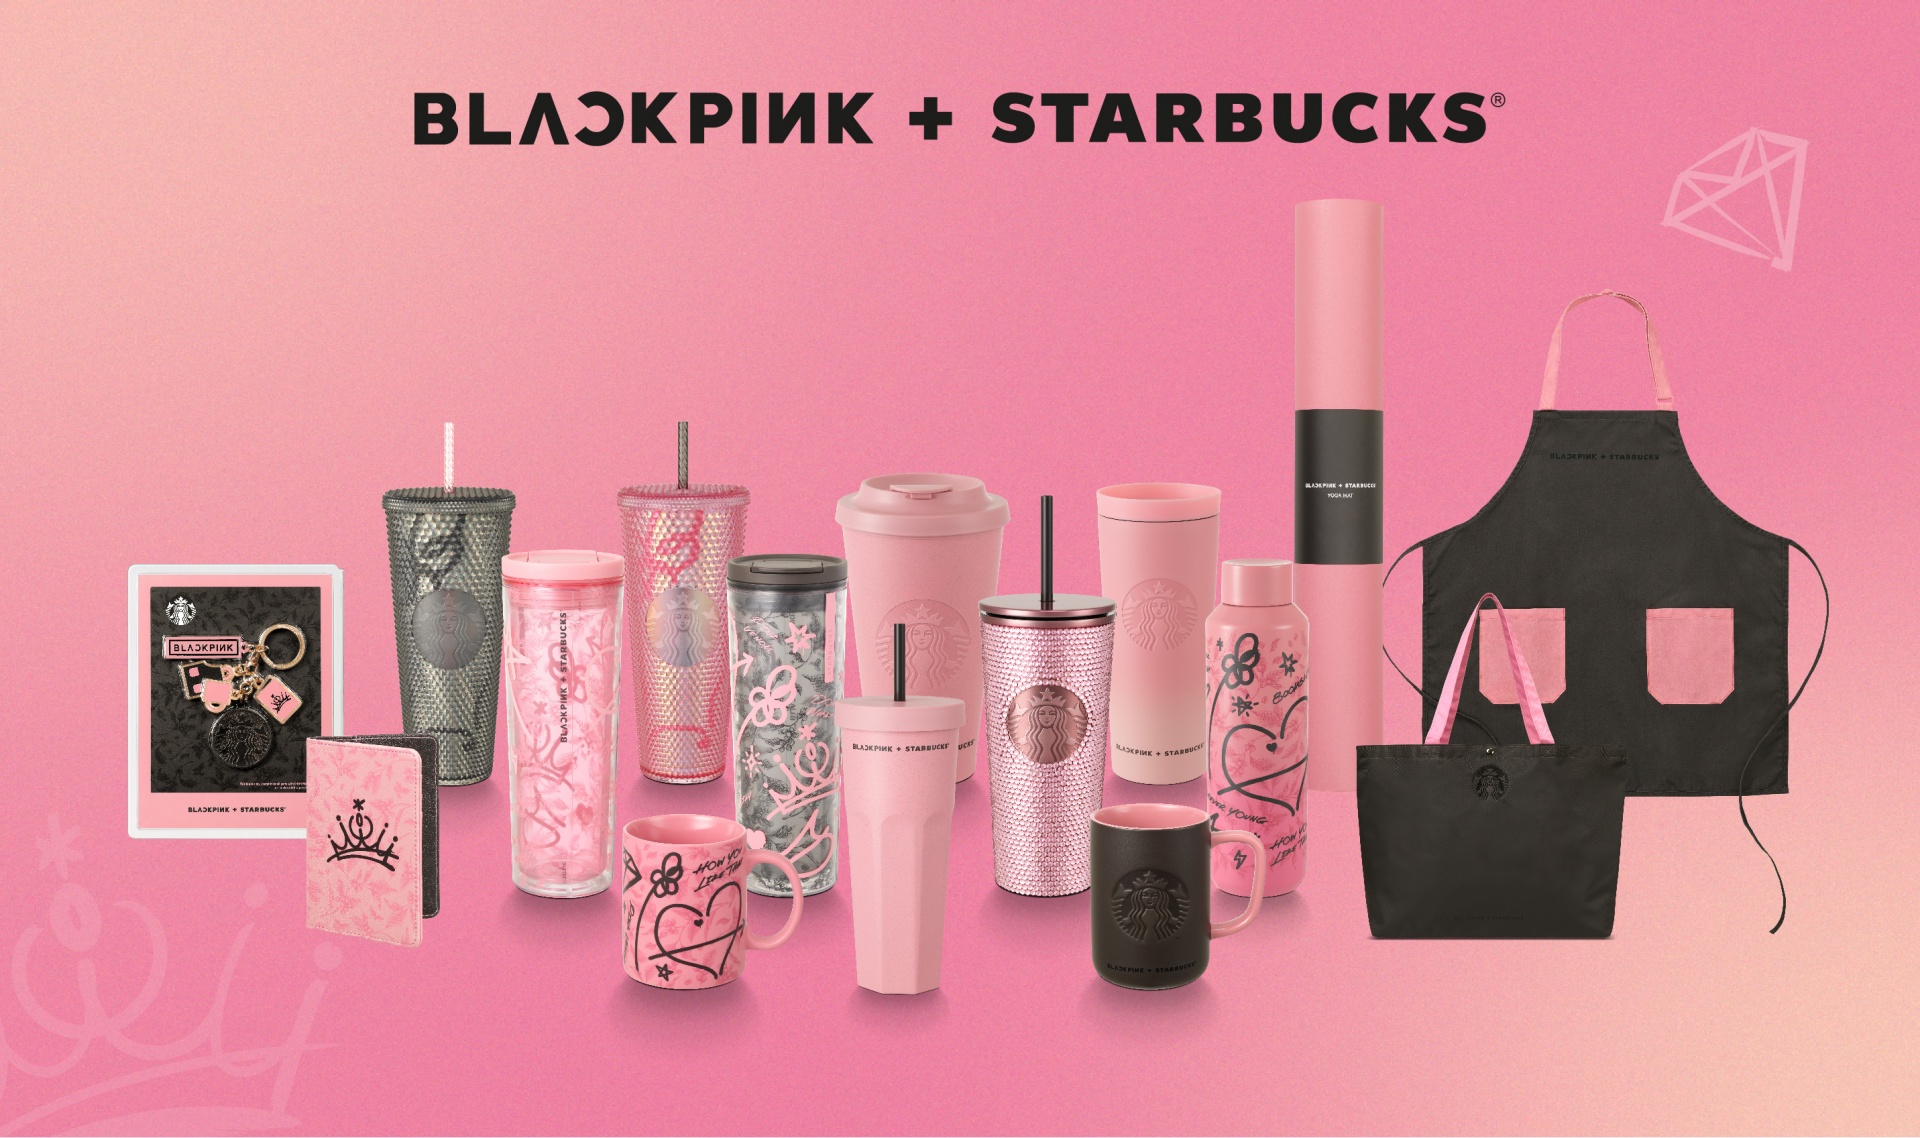 Starbucks and Blackpink join forces to dial up summer fun in Vietnam